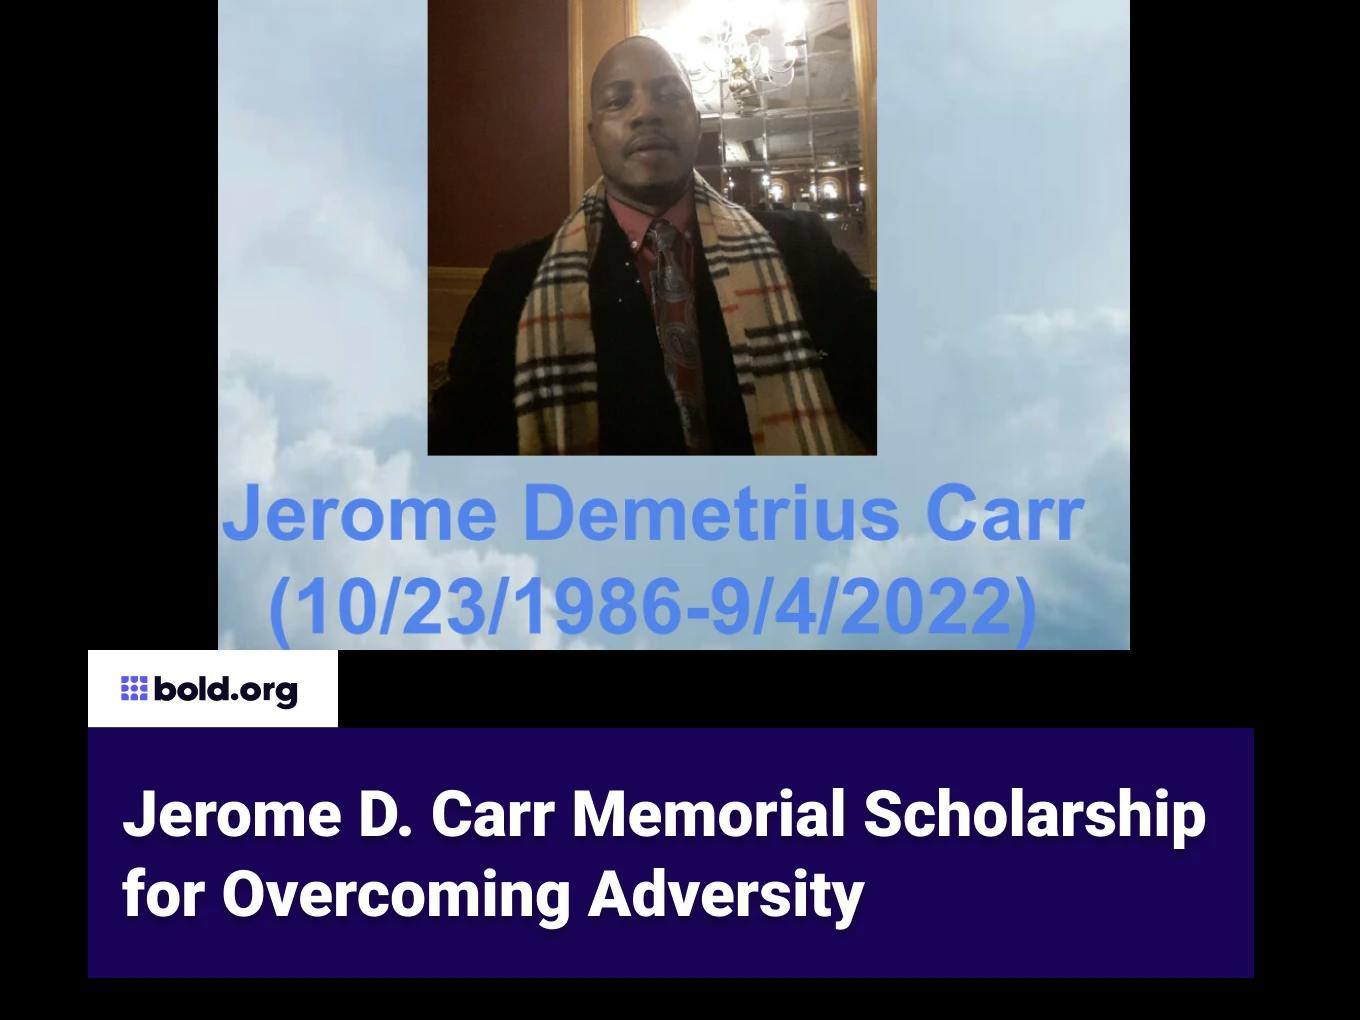 Jerome D. Carr Memorial Scholarship for Overcoming Adversity